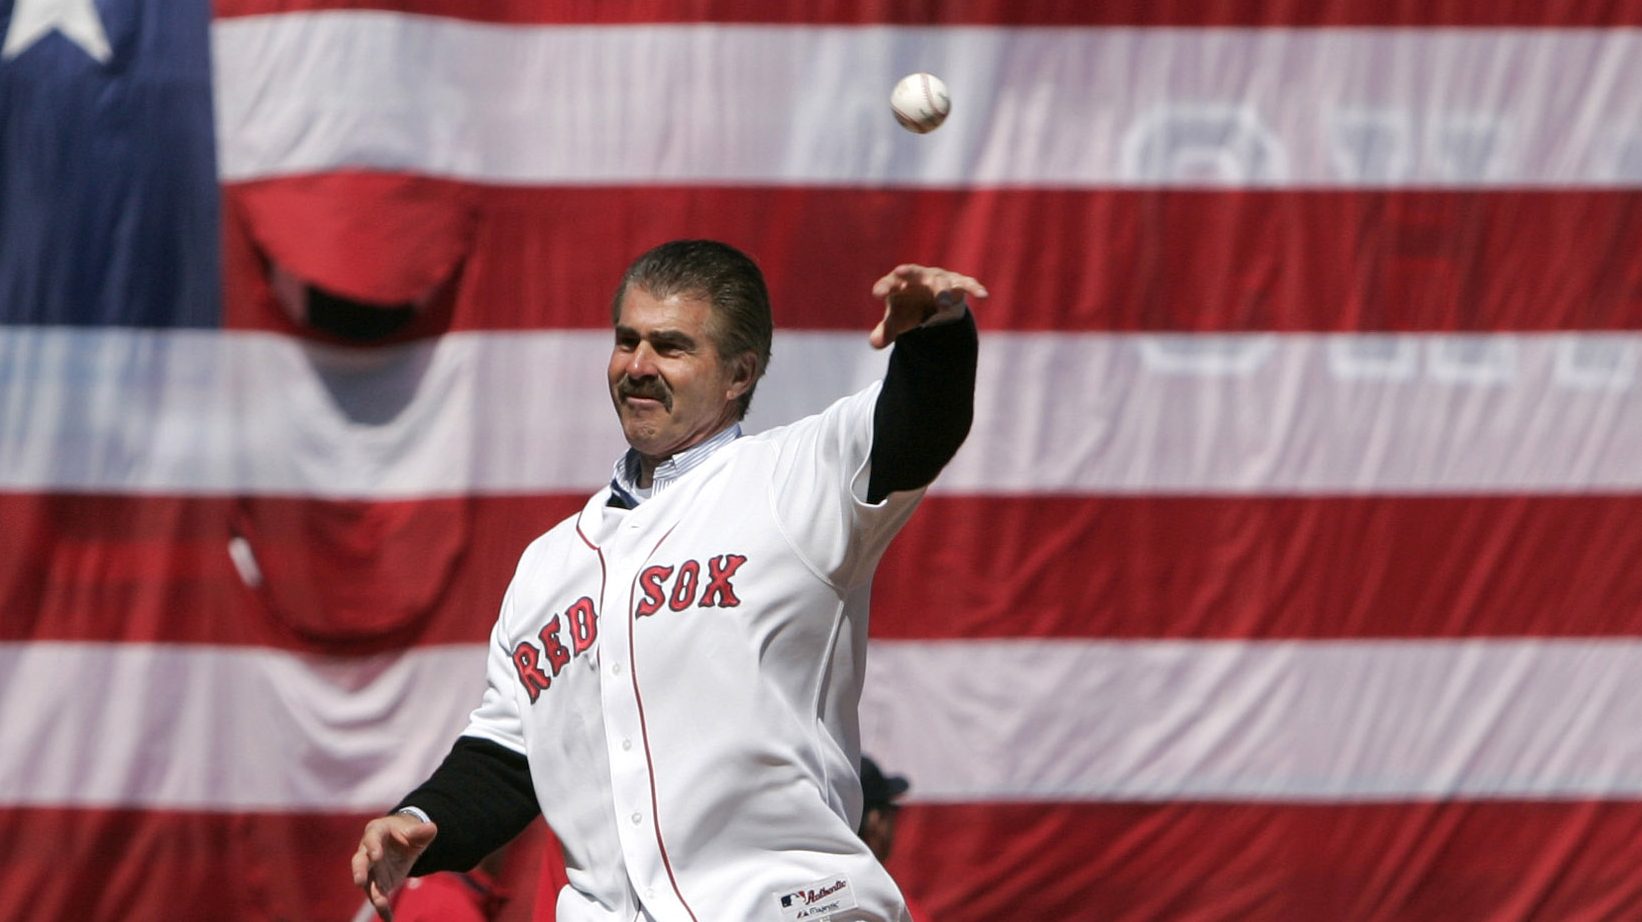 Bill Buckner Was A Winner In The Traditions That Made Baseball Great